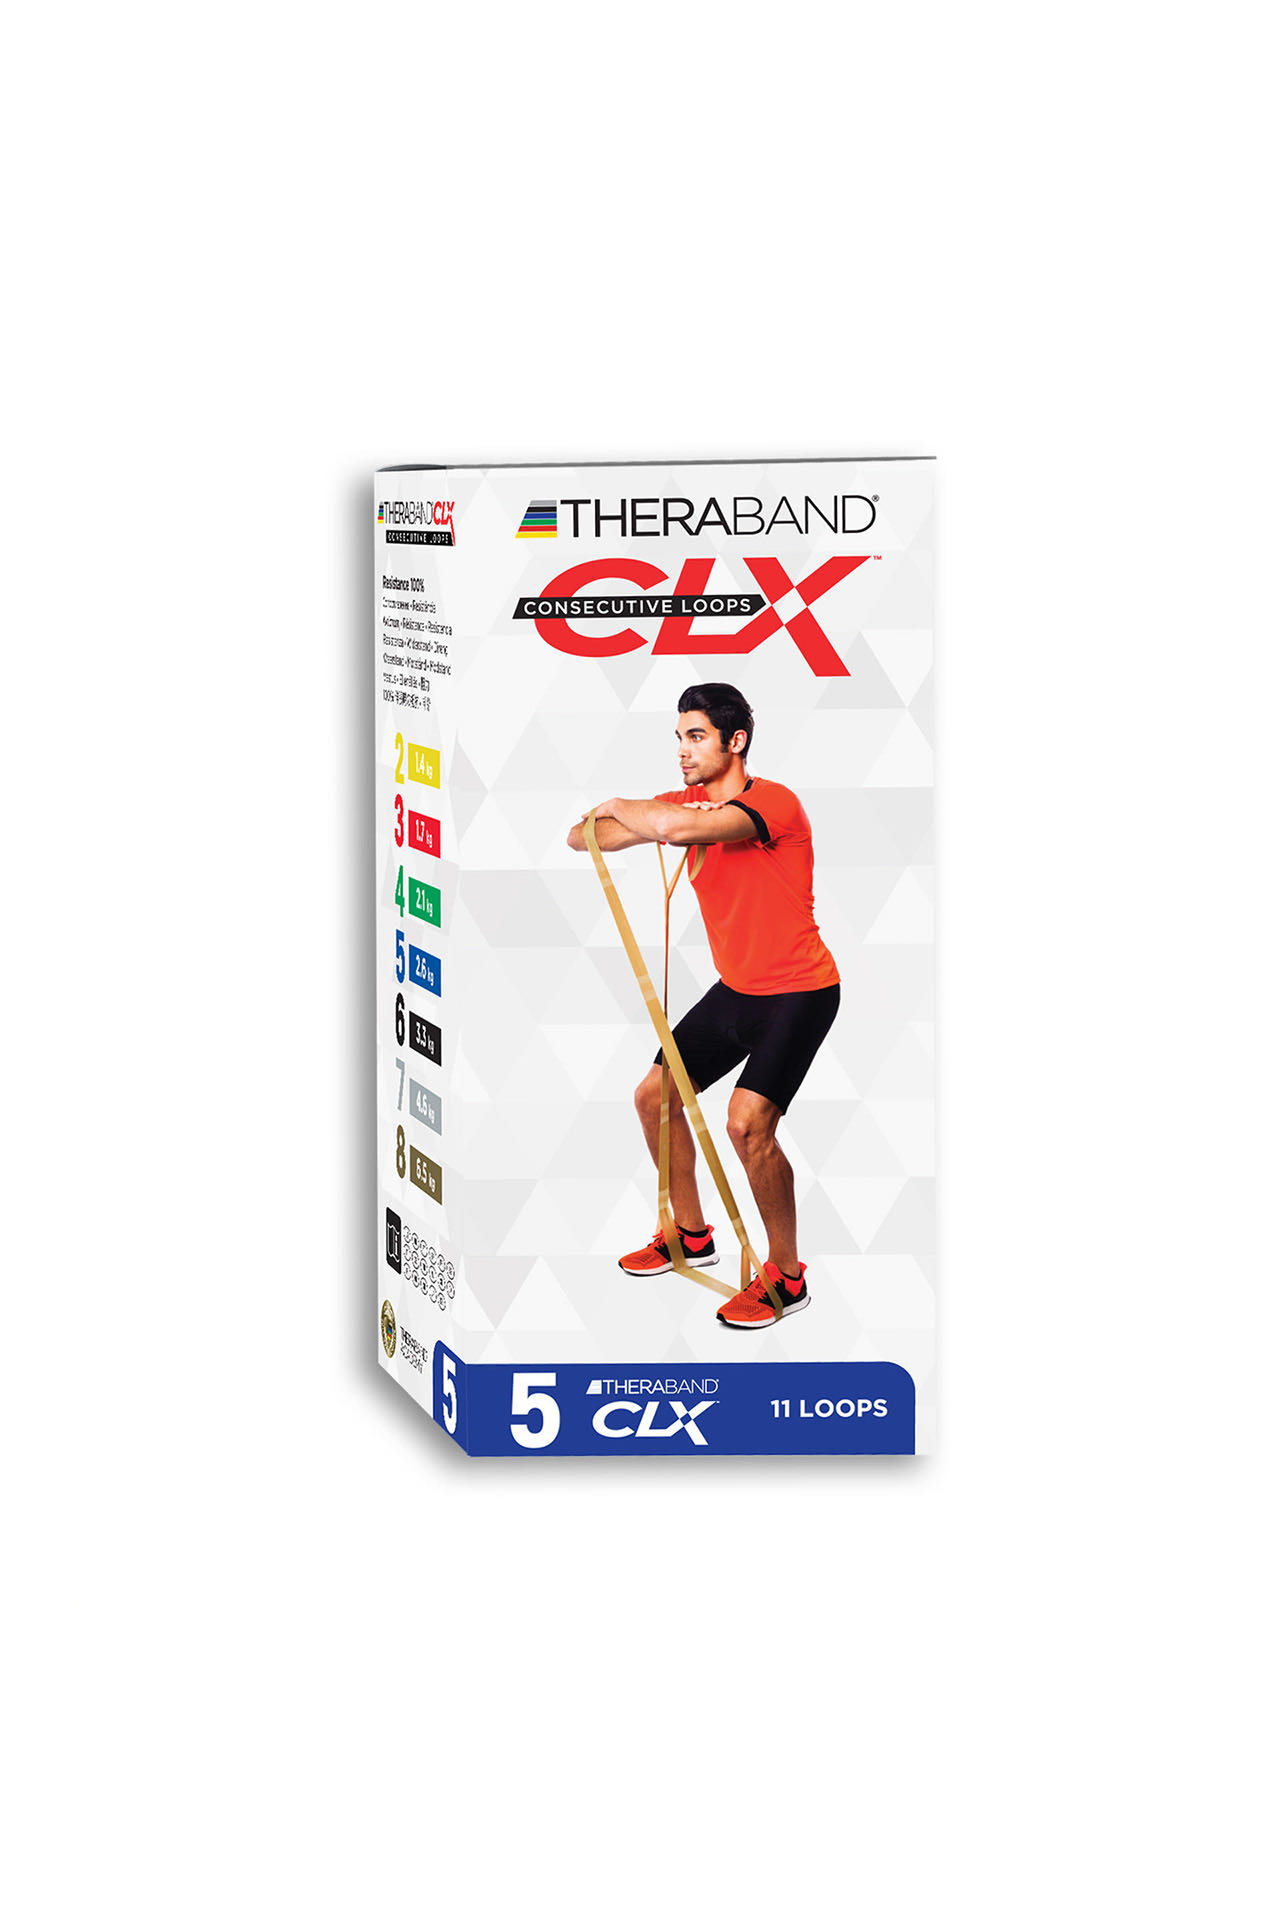 clx theraband trainingsband fitness sport fengbao kung fu wien 1080 rot verpackung